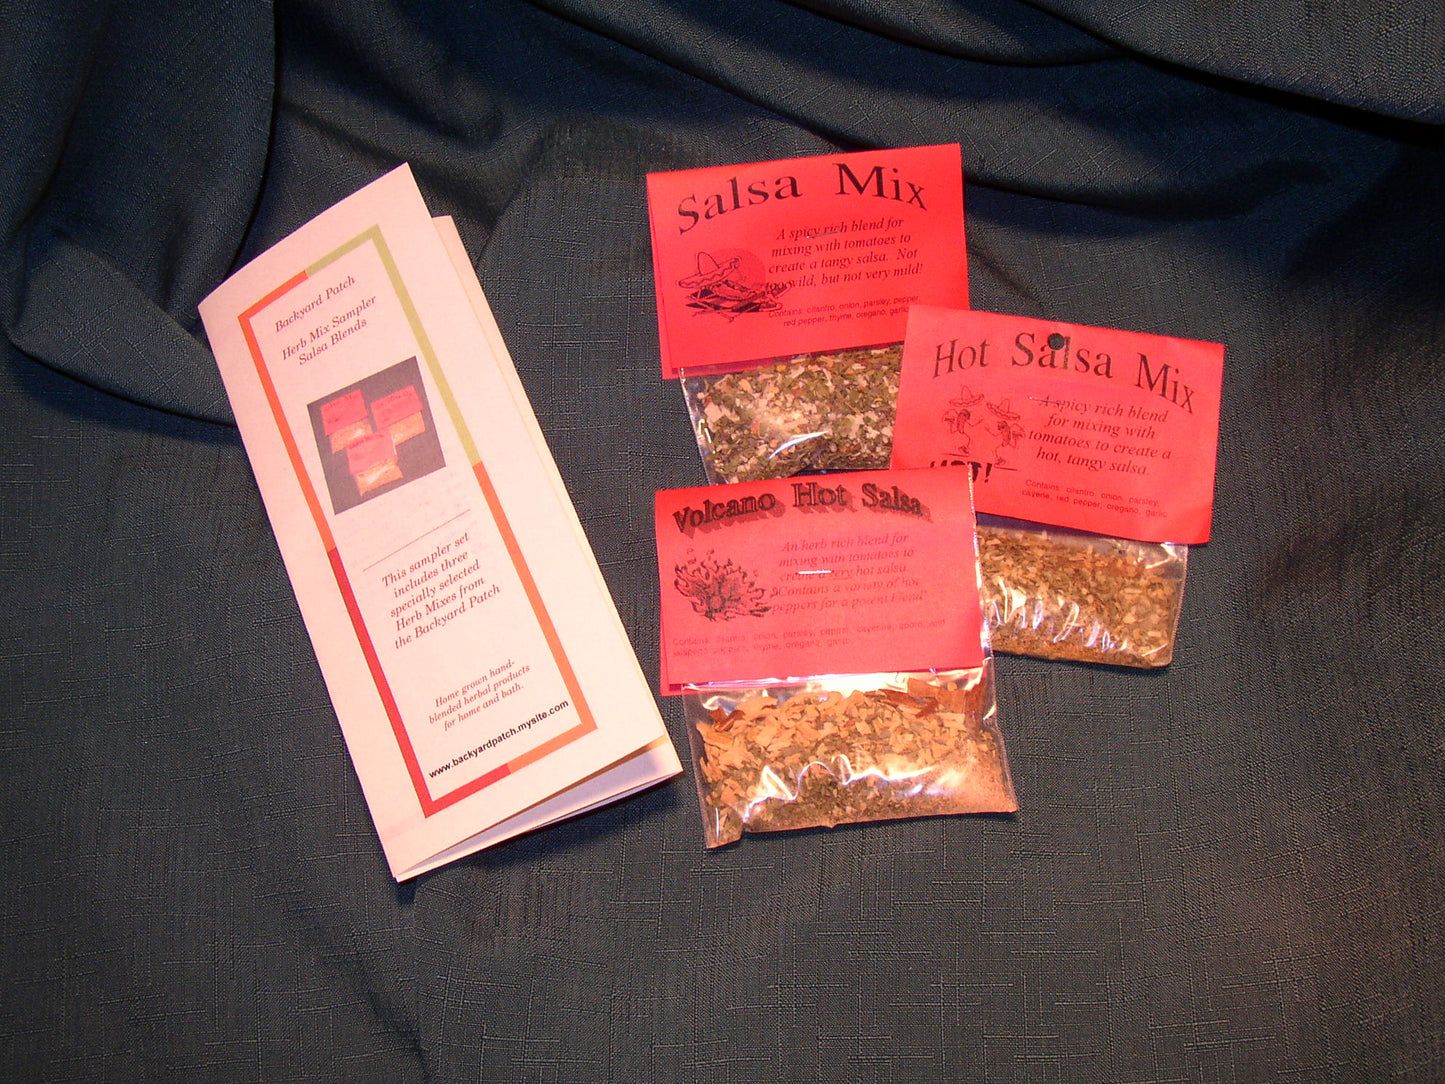 Sampler Set of Herb Mixes and Teas - you choose from over 16 different combinations